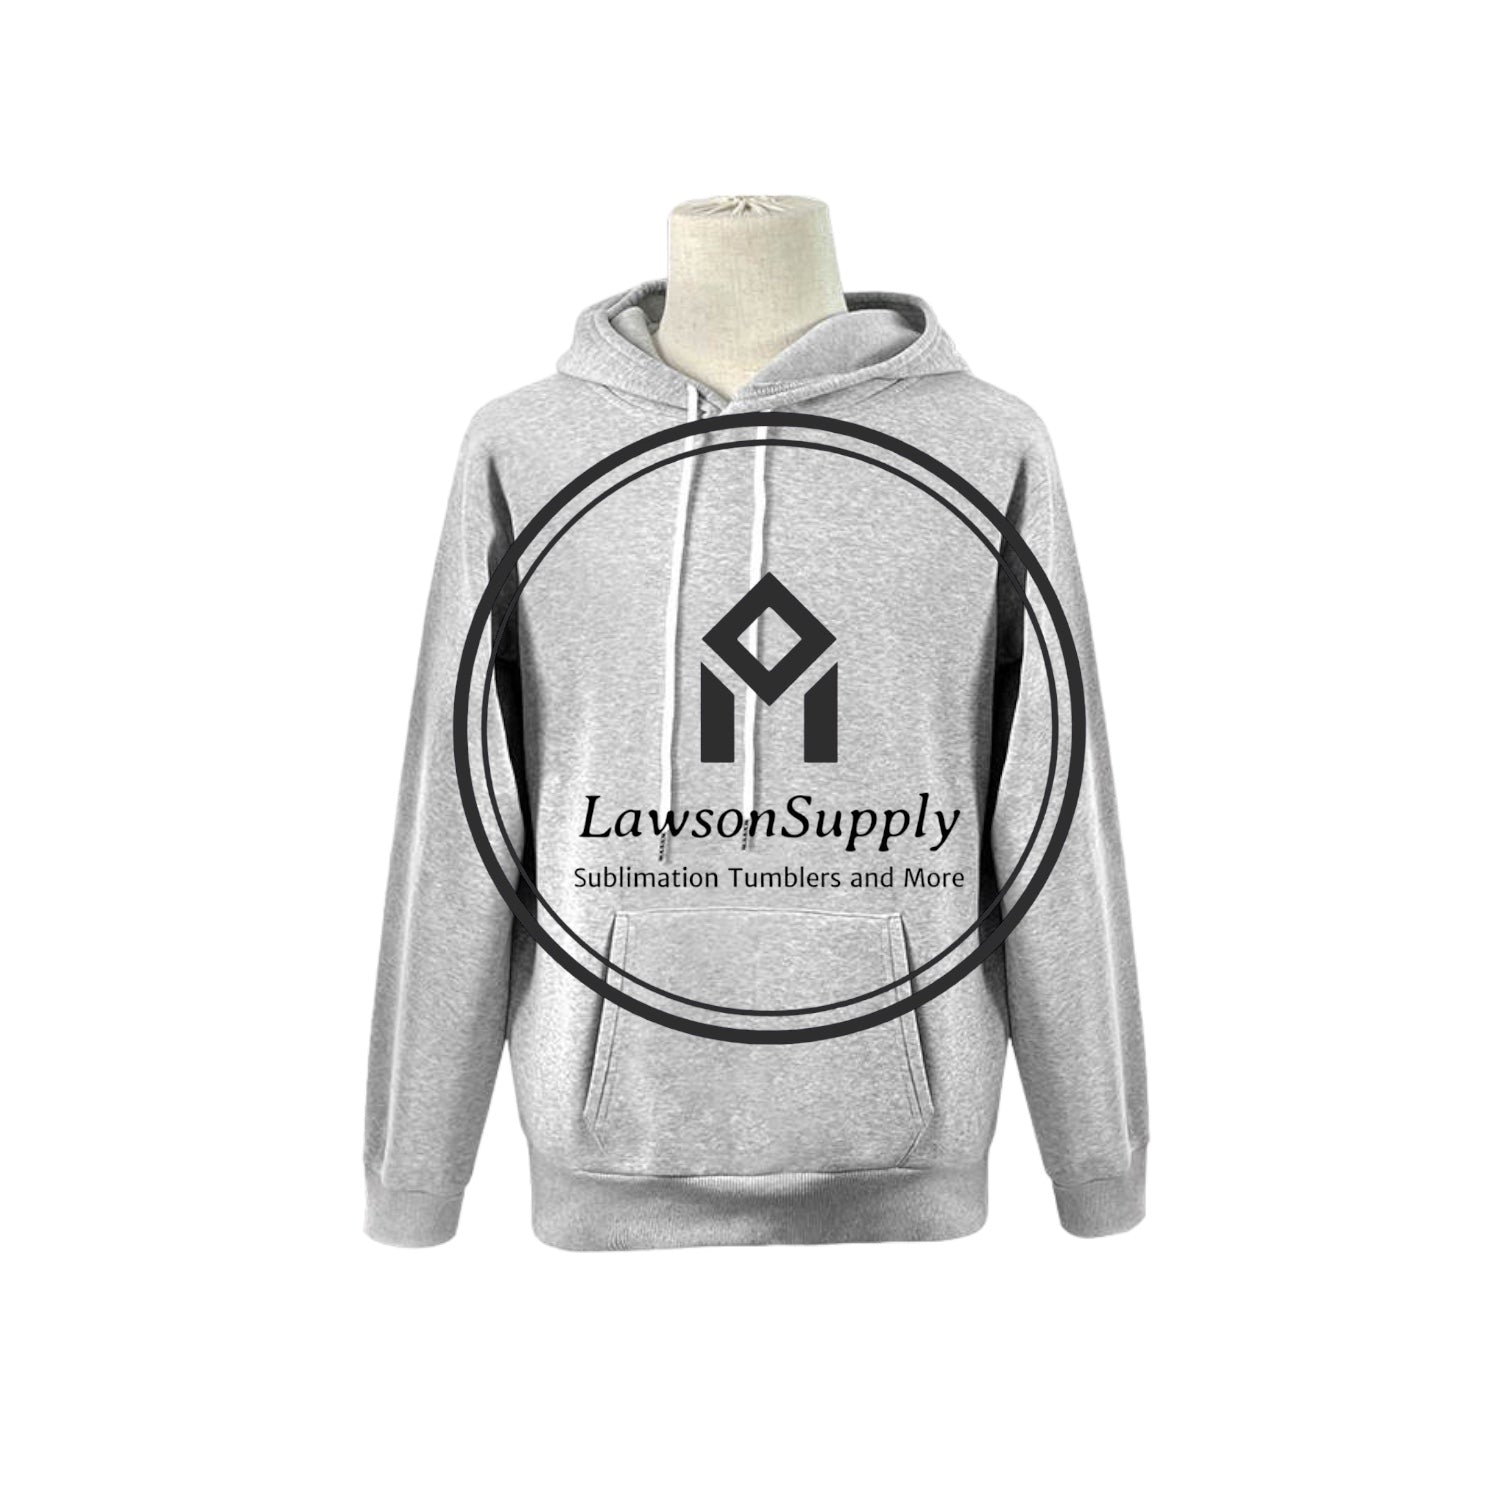 Sublimation 100% Polyester Grey Sublimation Sweatshirt Soft Cotton Feel  Fleece-lined Sublimation Hoodie Ready to Ship, Men, Youth, Plus Size 